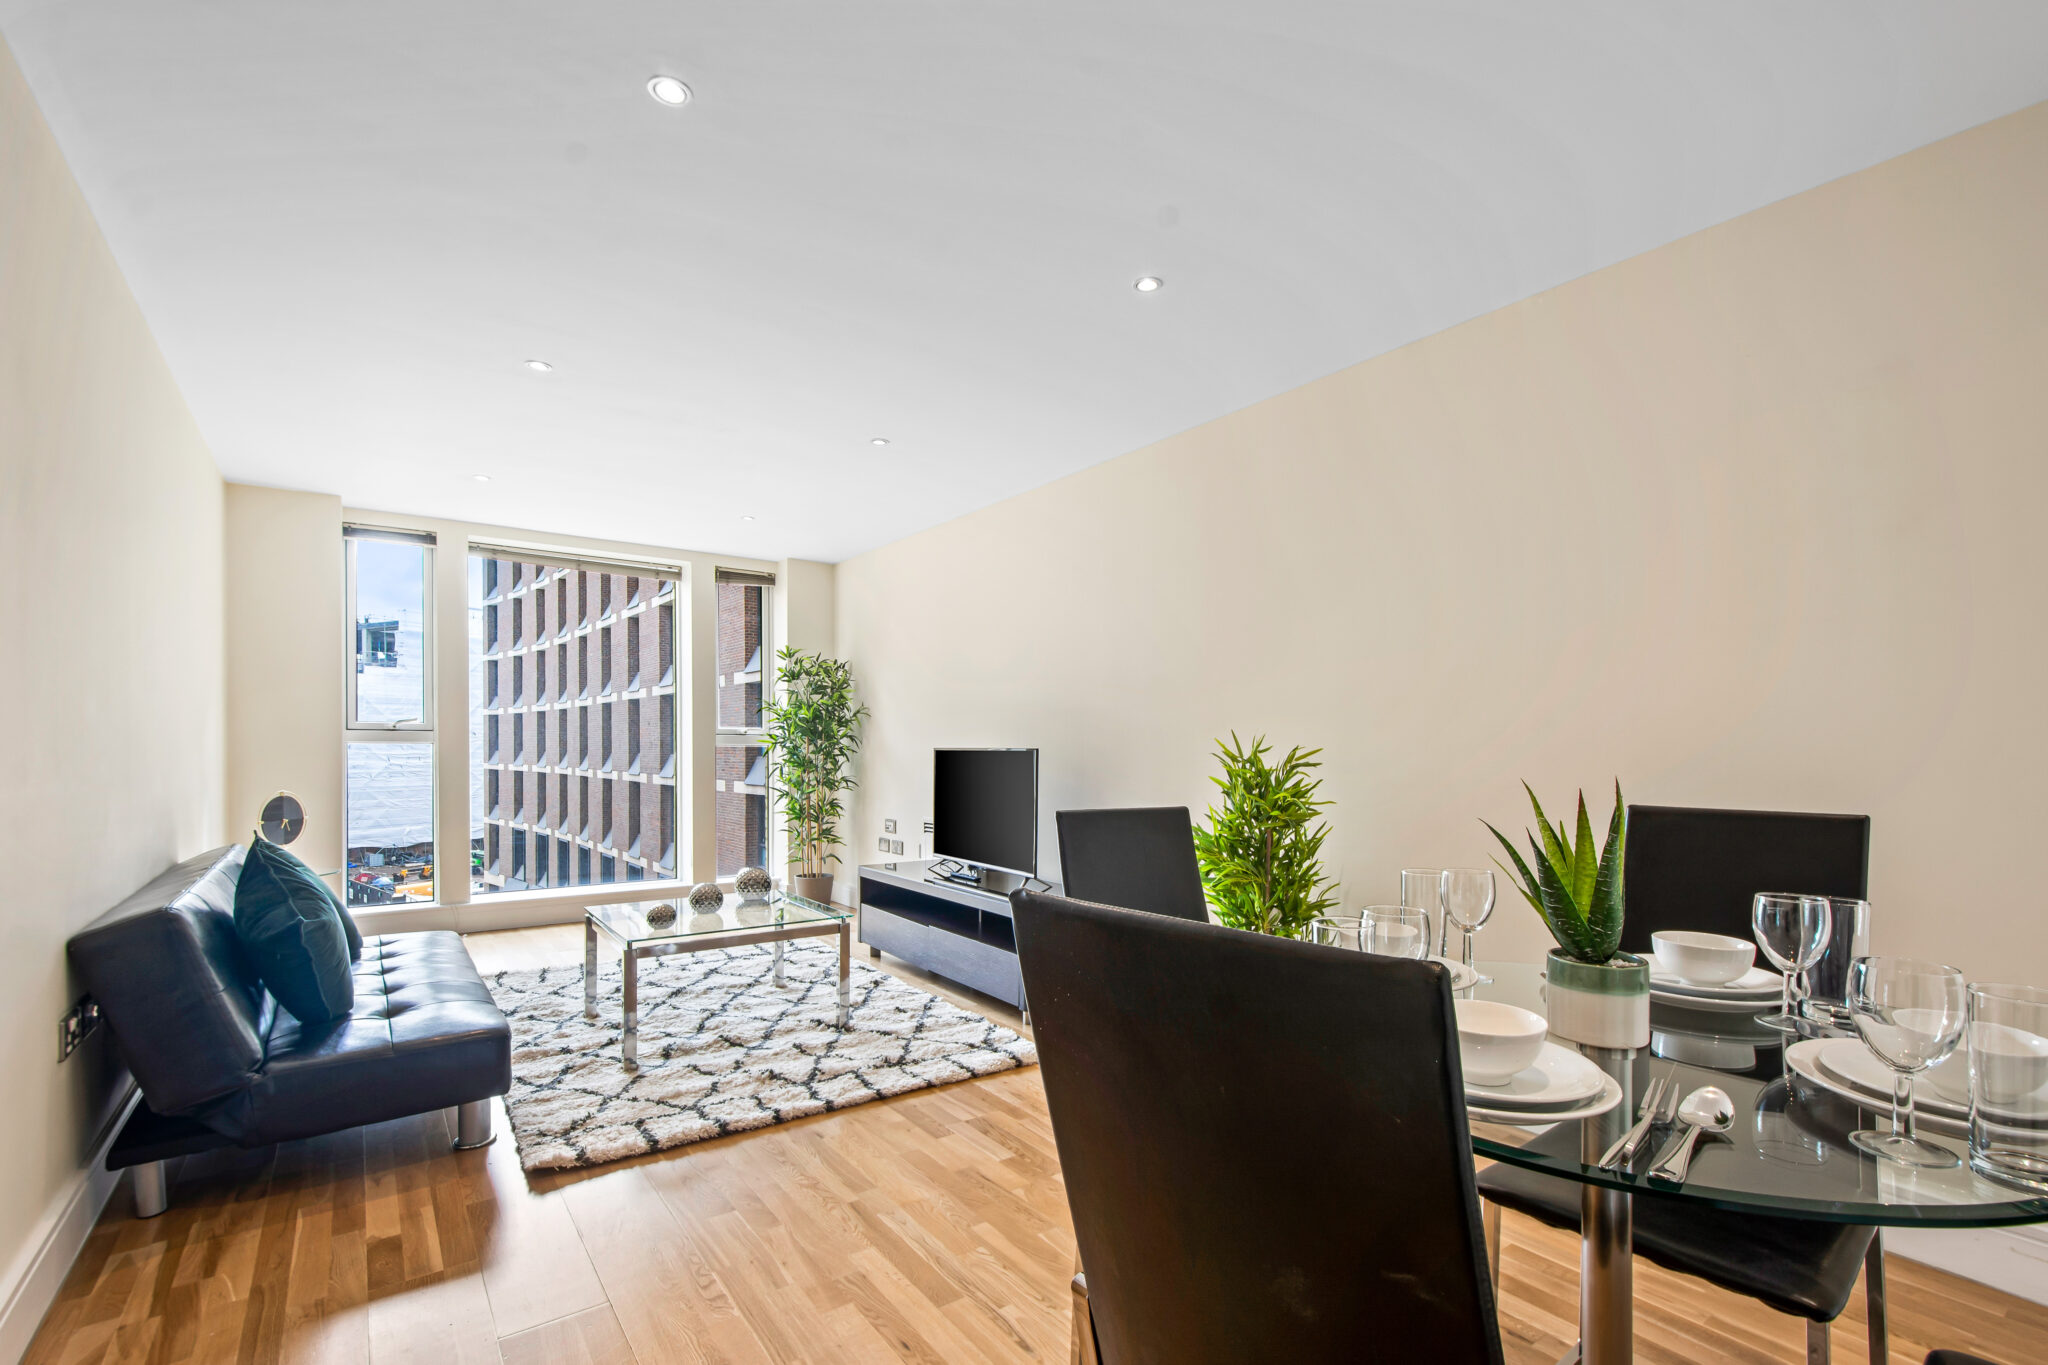 Experience luxury serviced accommodation near London Waterloo. Book your London stay for modern amenities and a prime central location! Urban Stay